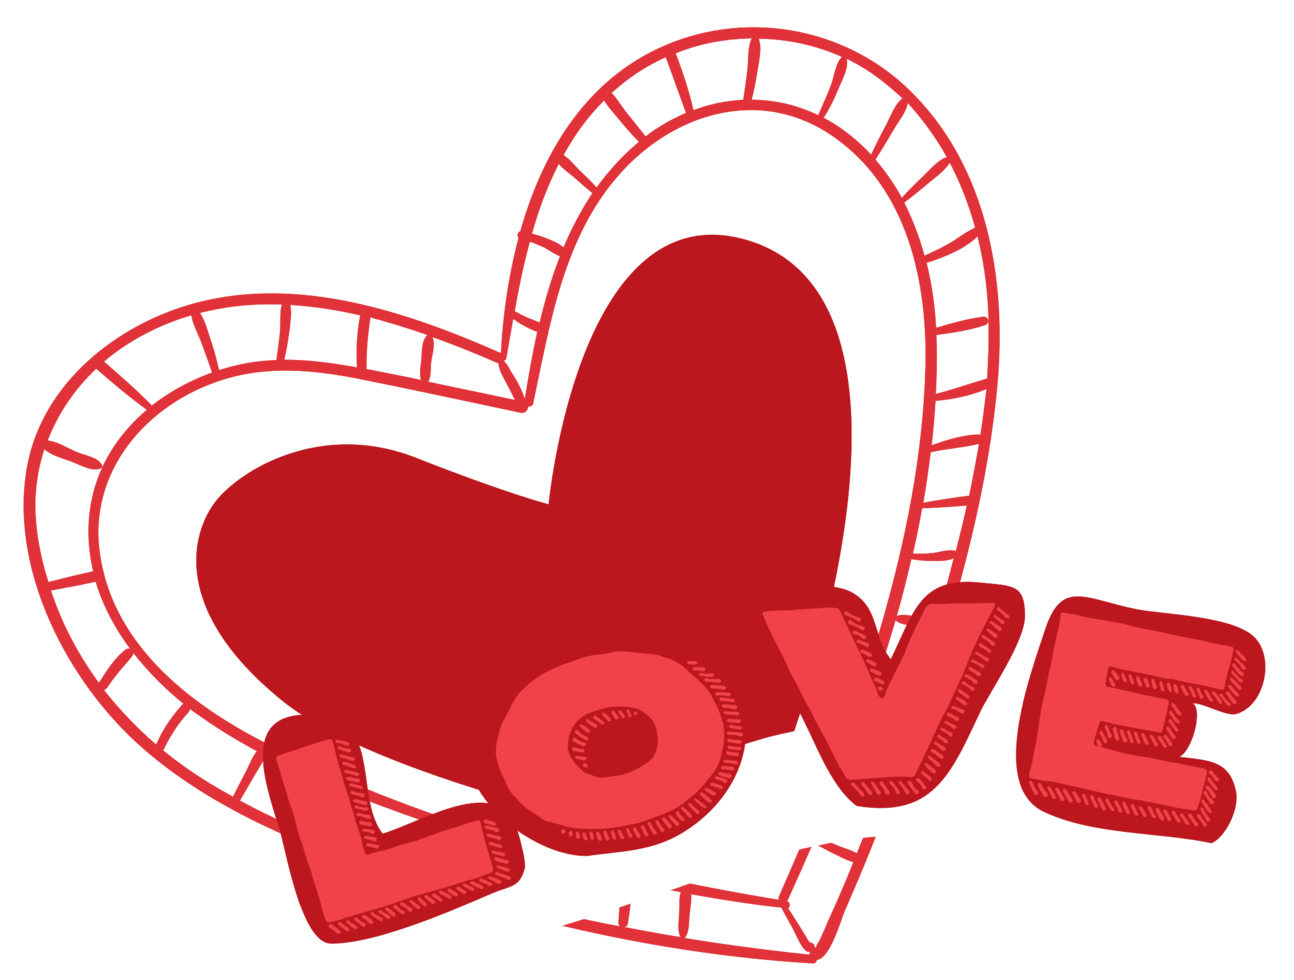 Love typography png